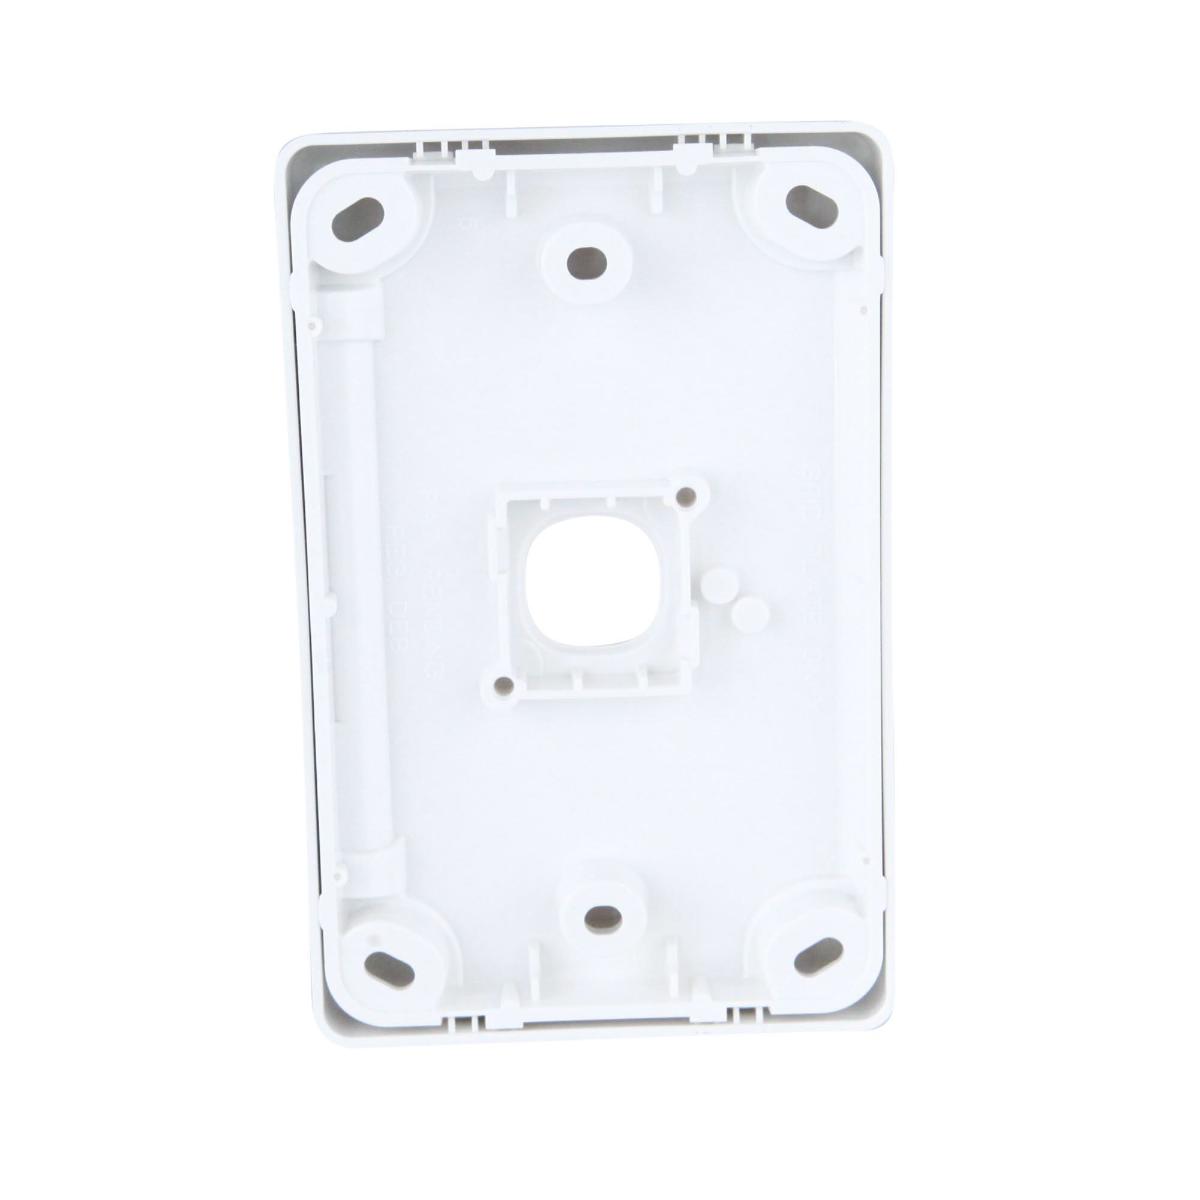 C2000 PLATE GRID & COVER 1G WHITE